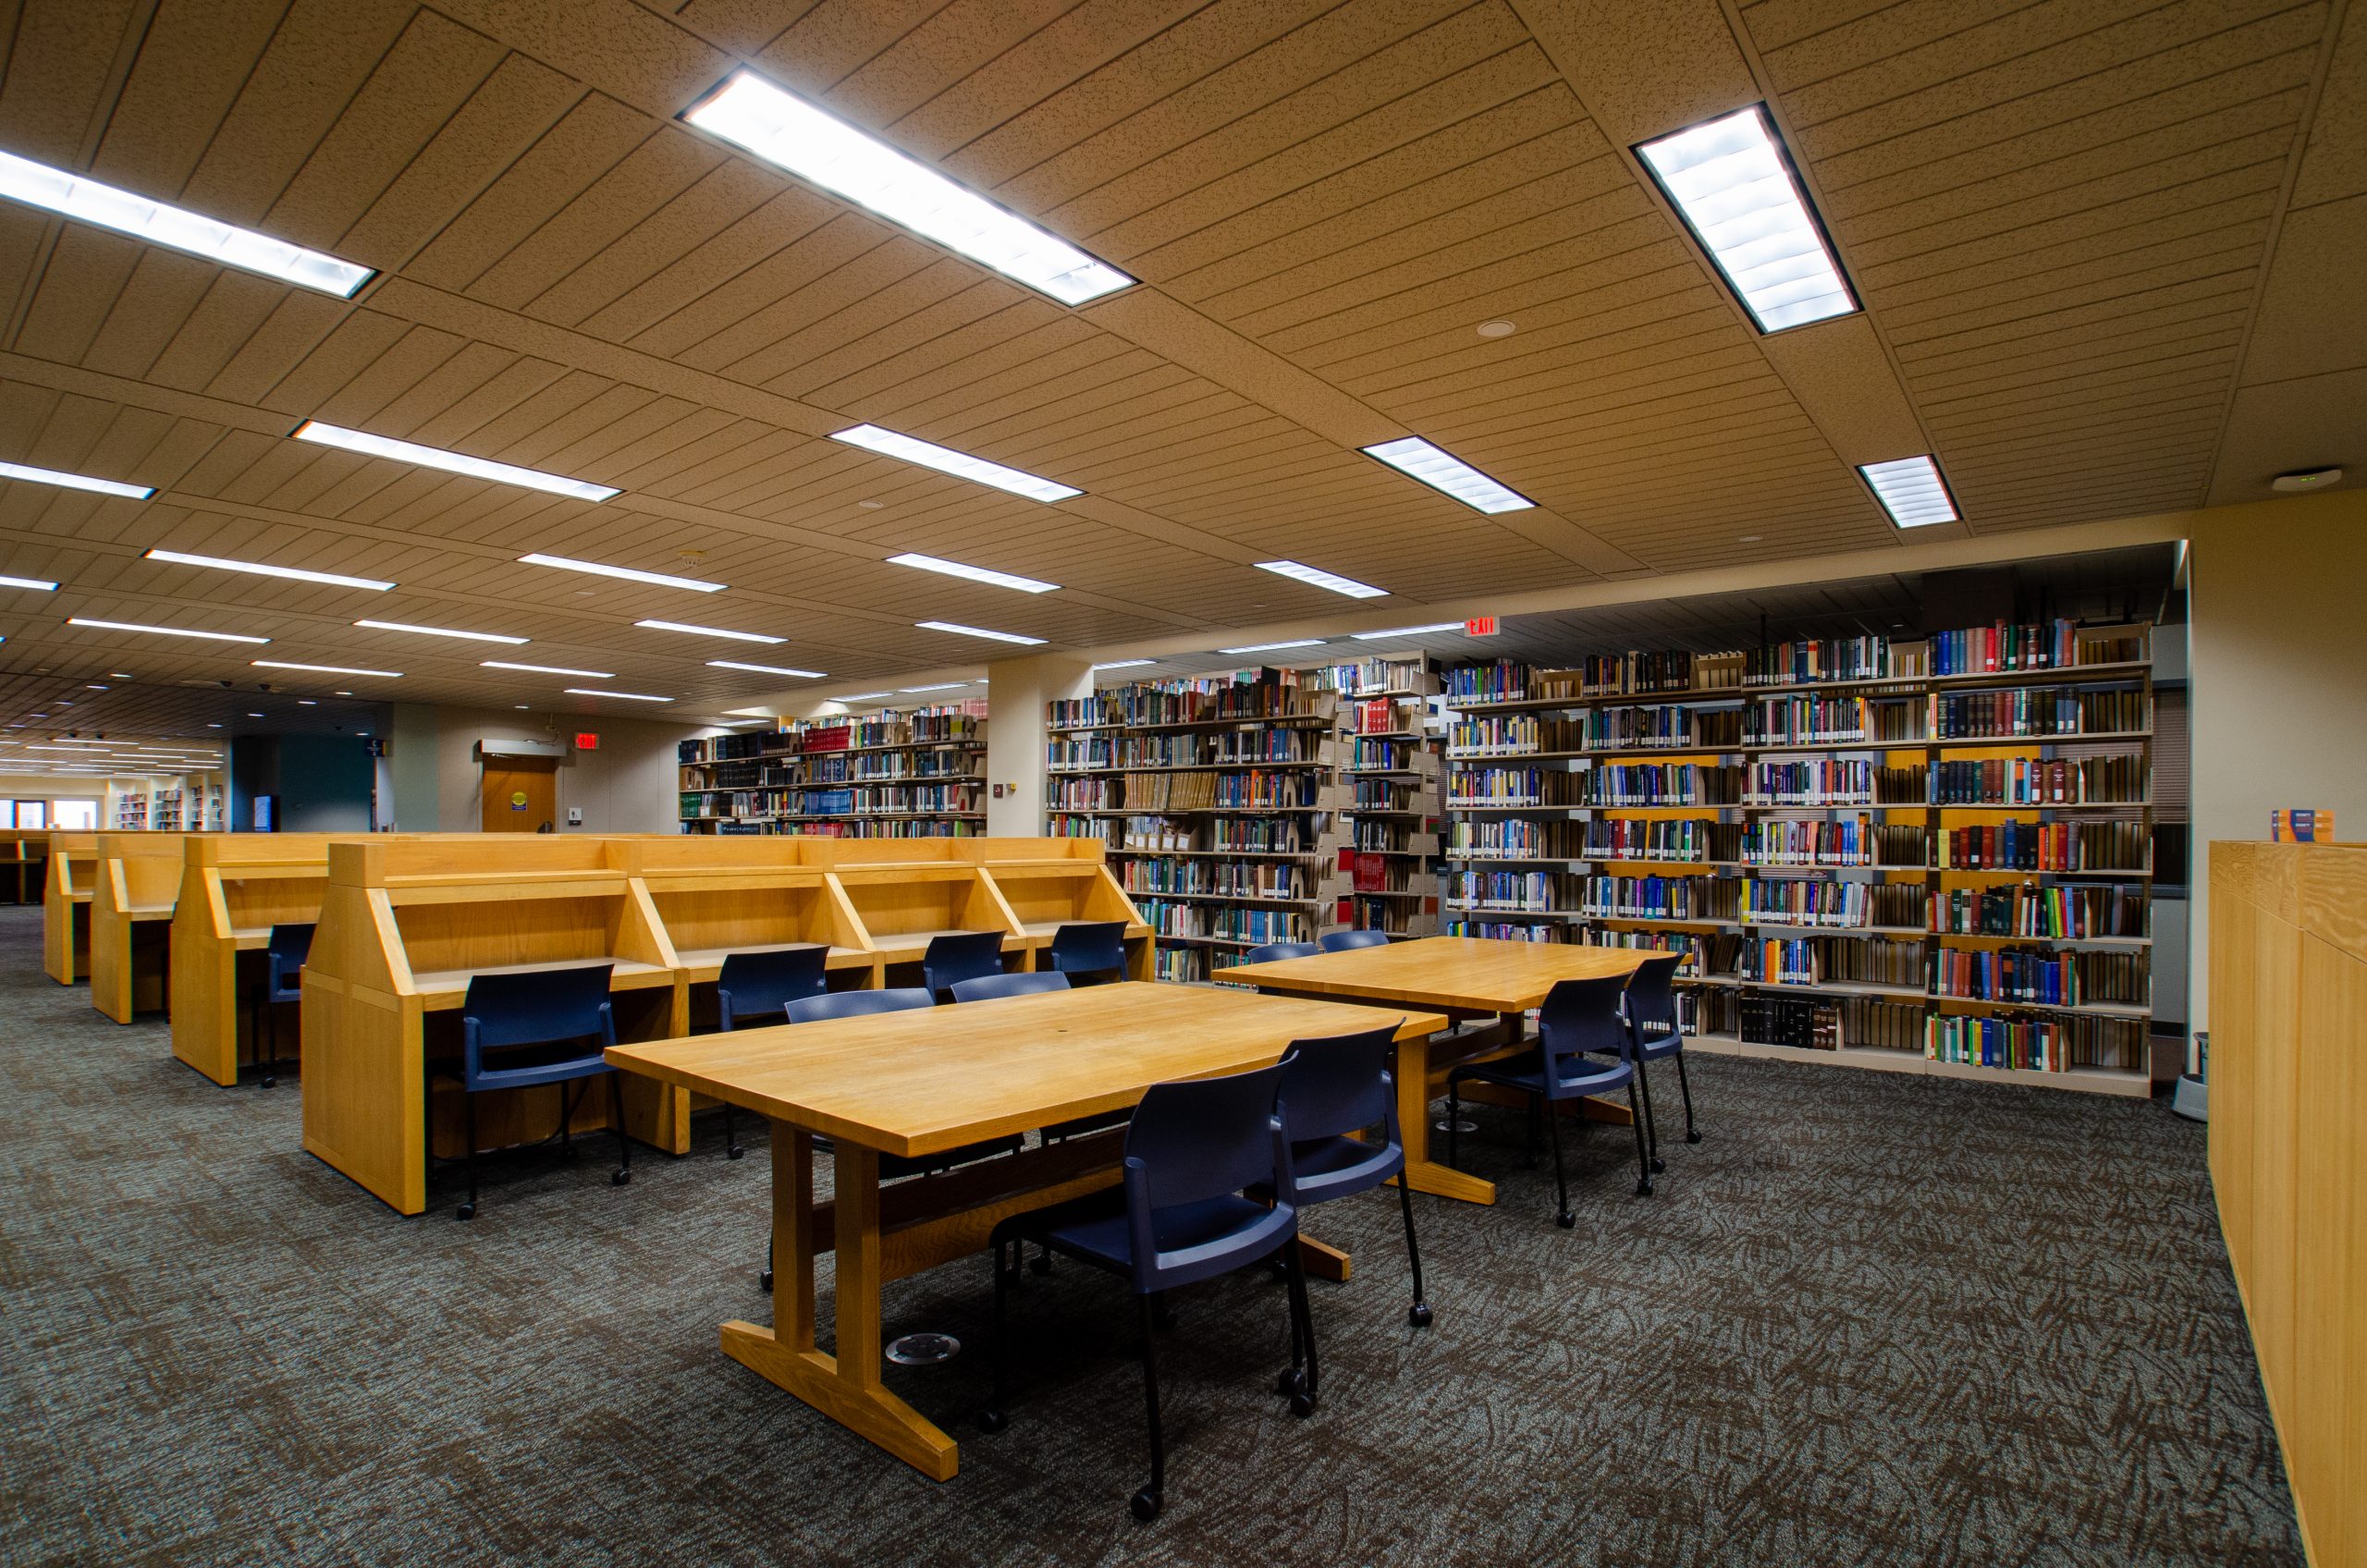 Quiet Study Tables in hodges library